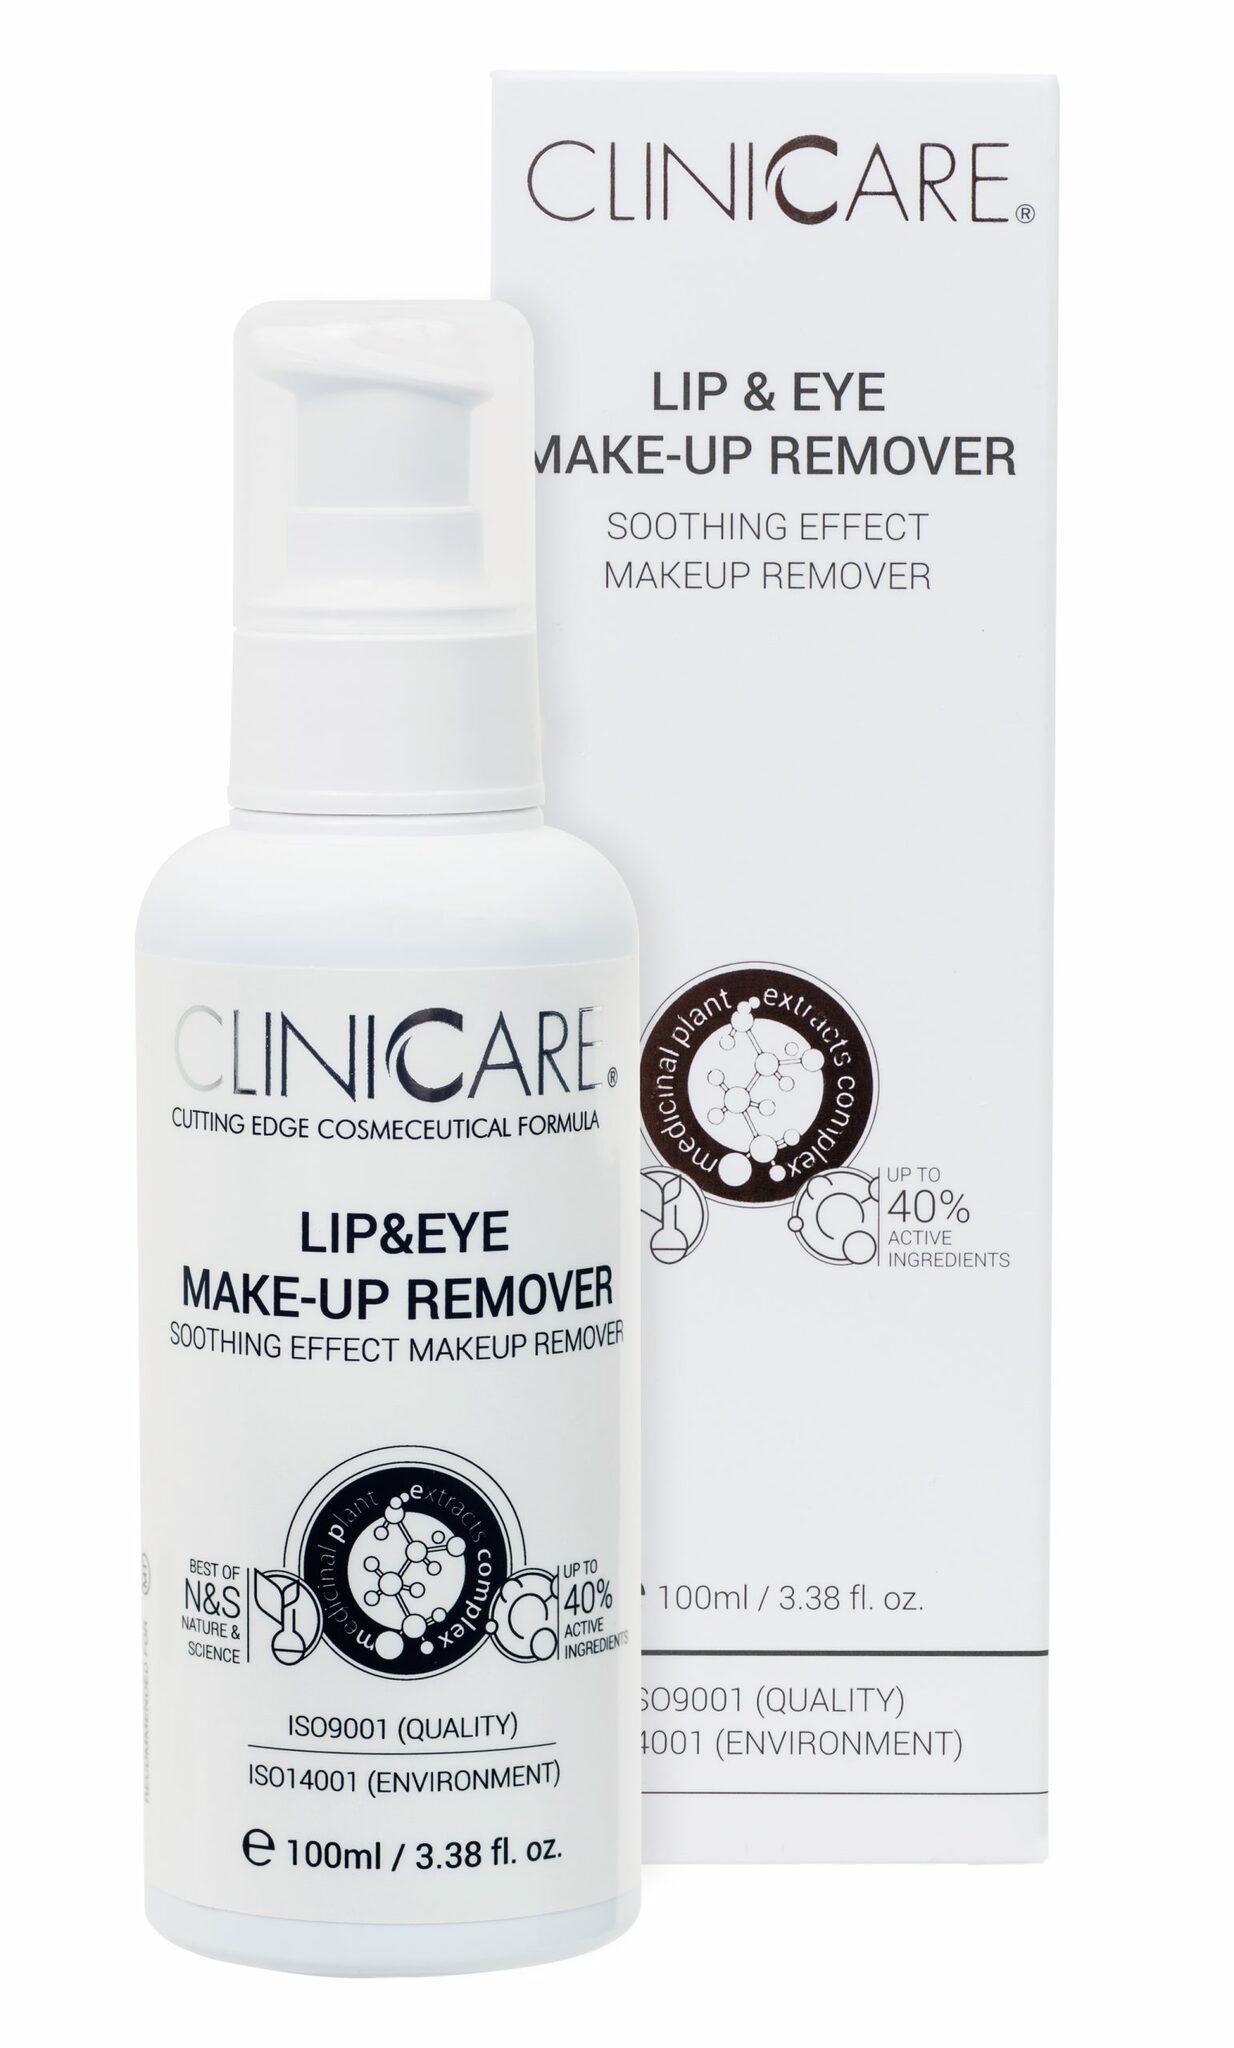 Clinicare Lip & Eye make-up remover